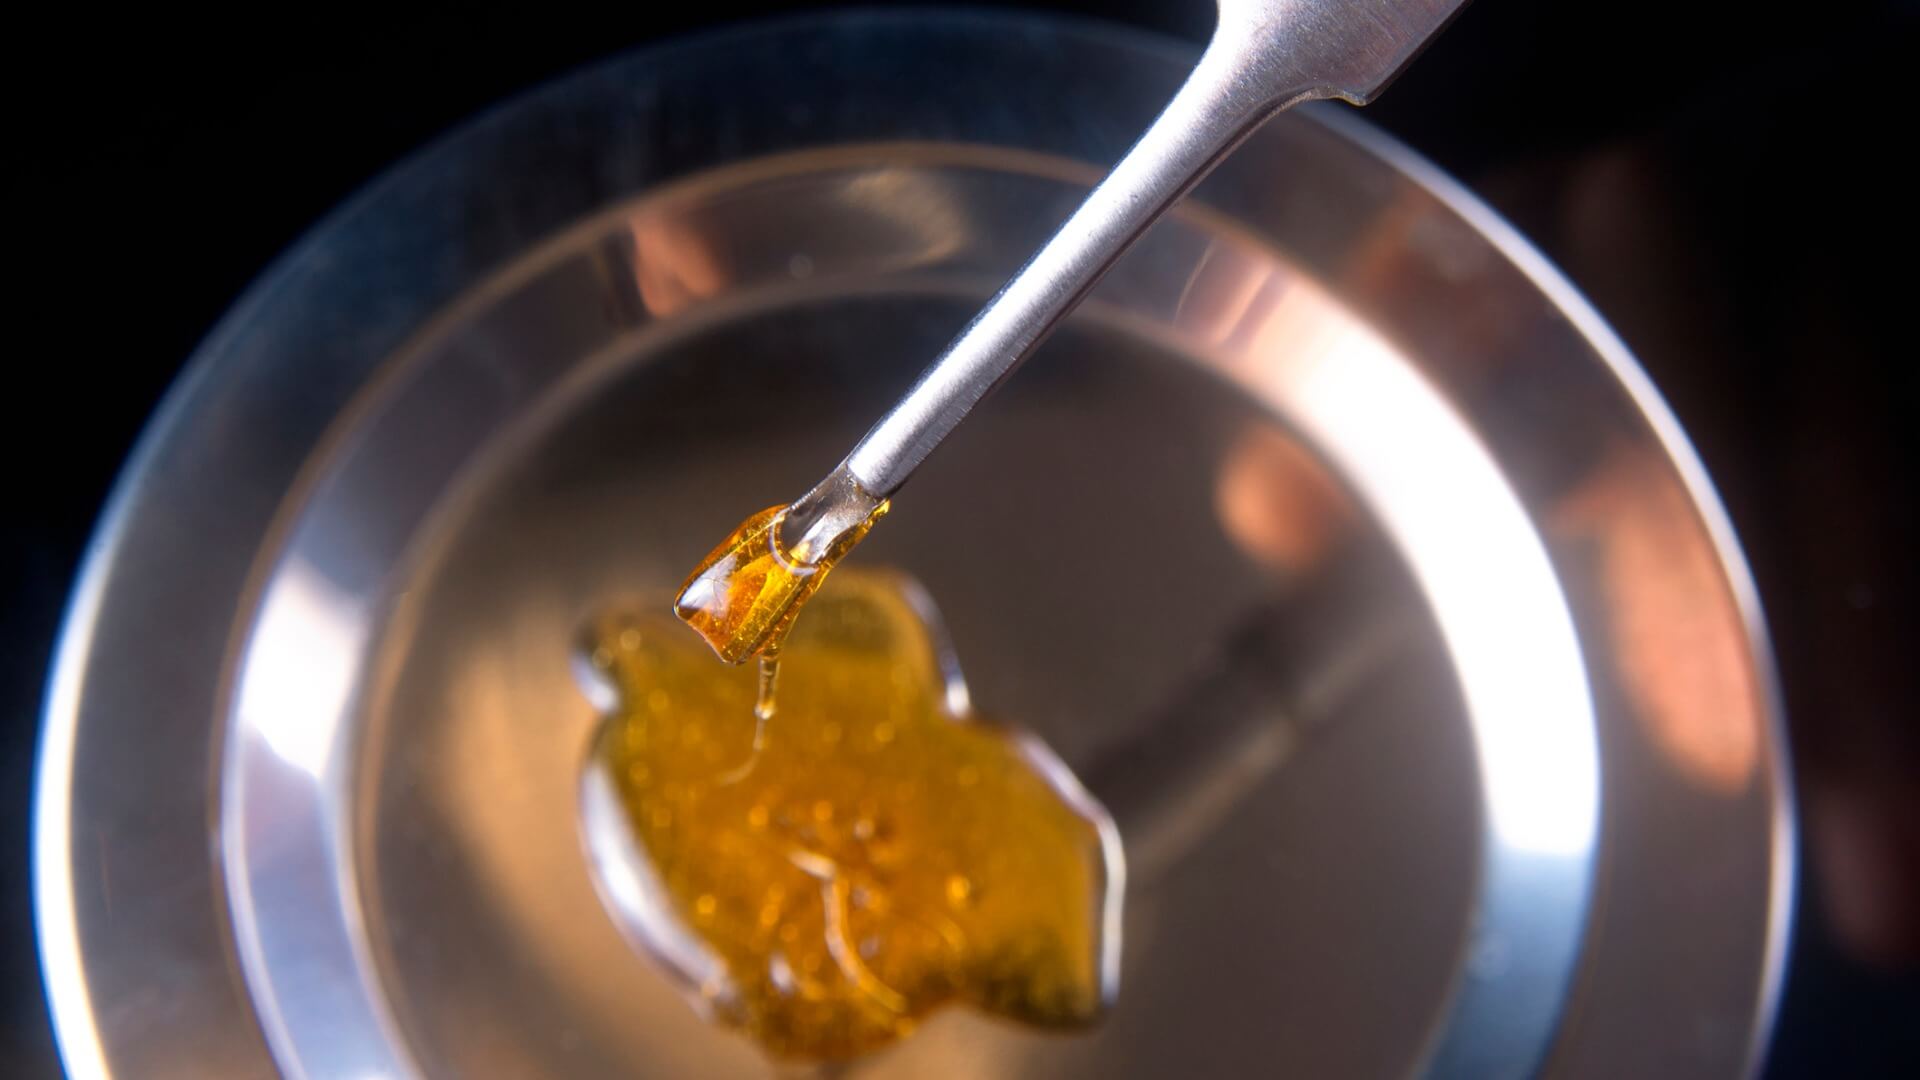 Melted cannabis concentrate on a dabbing tool